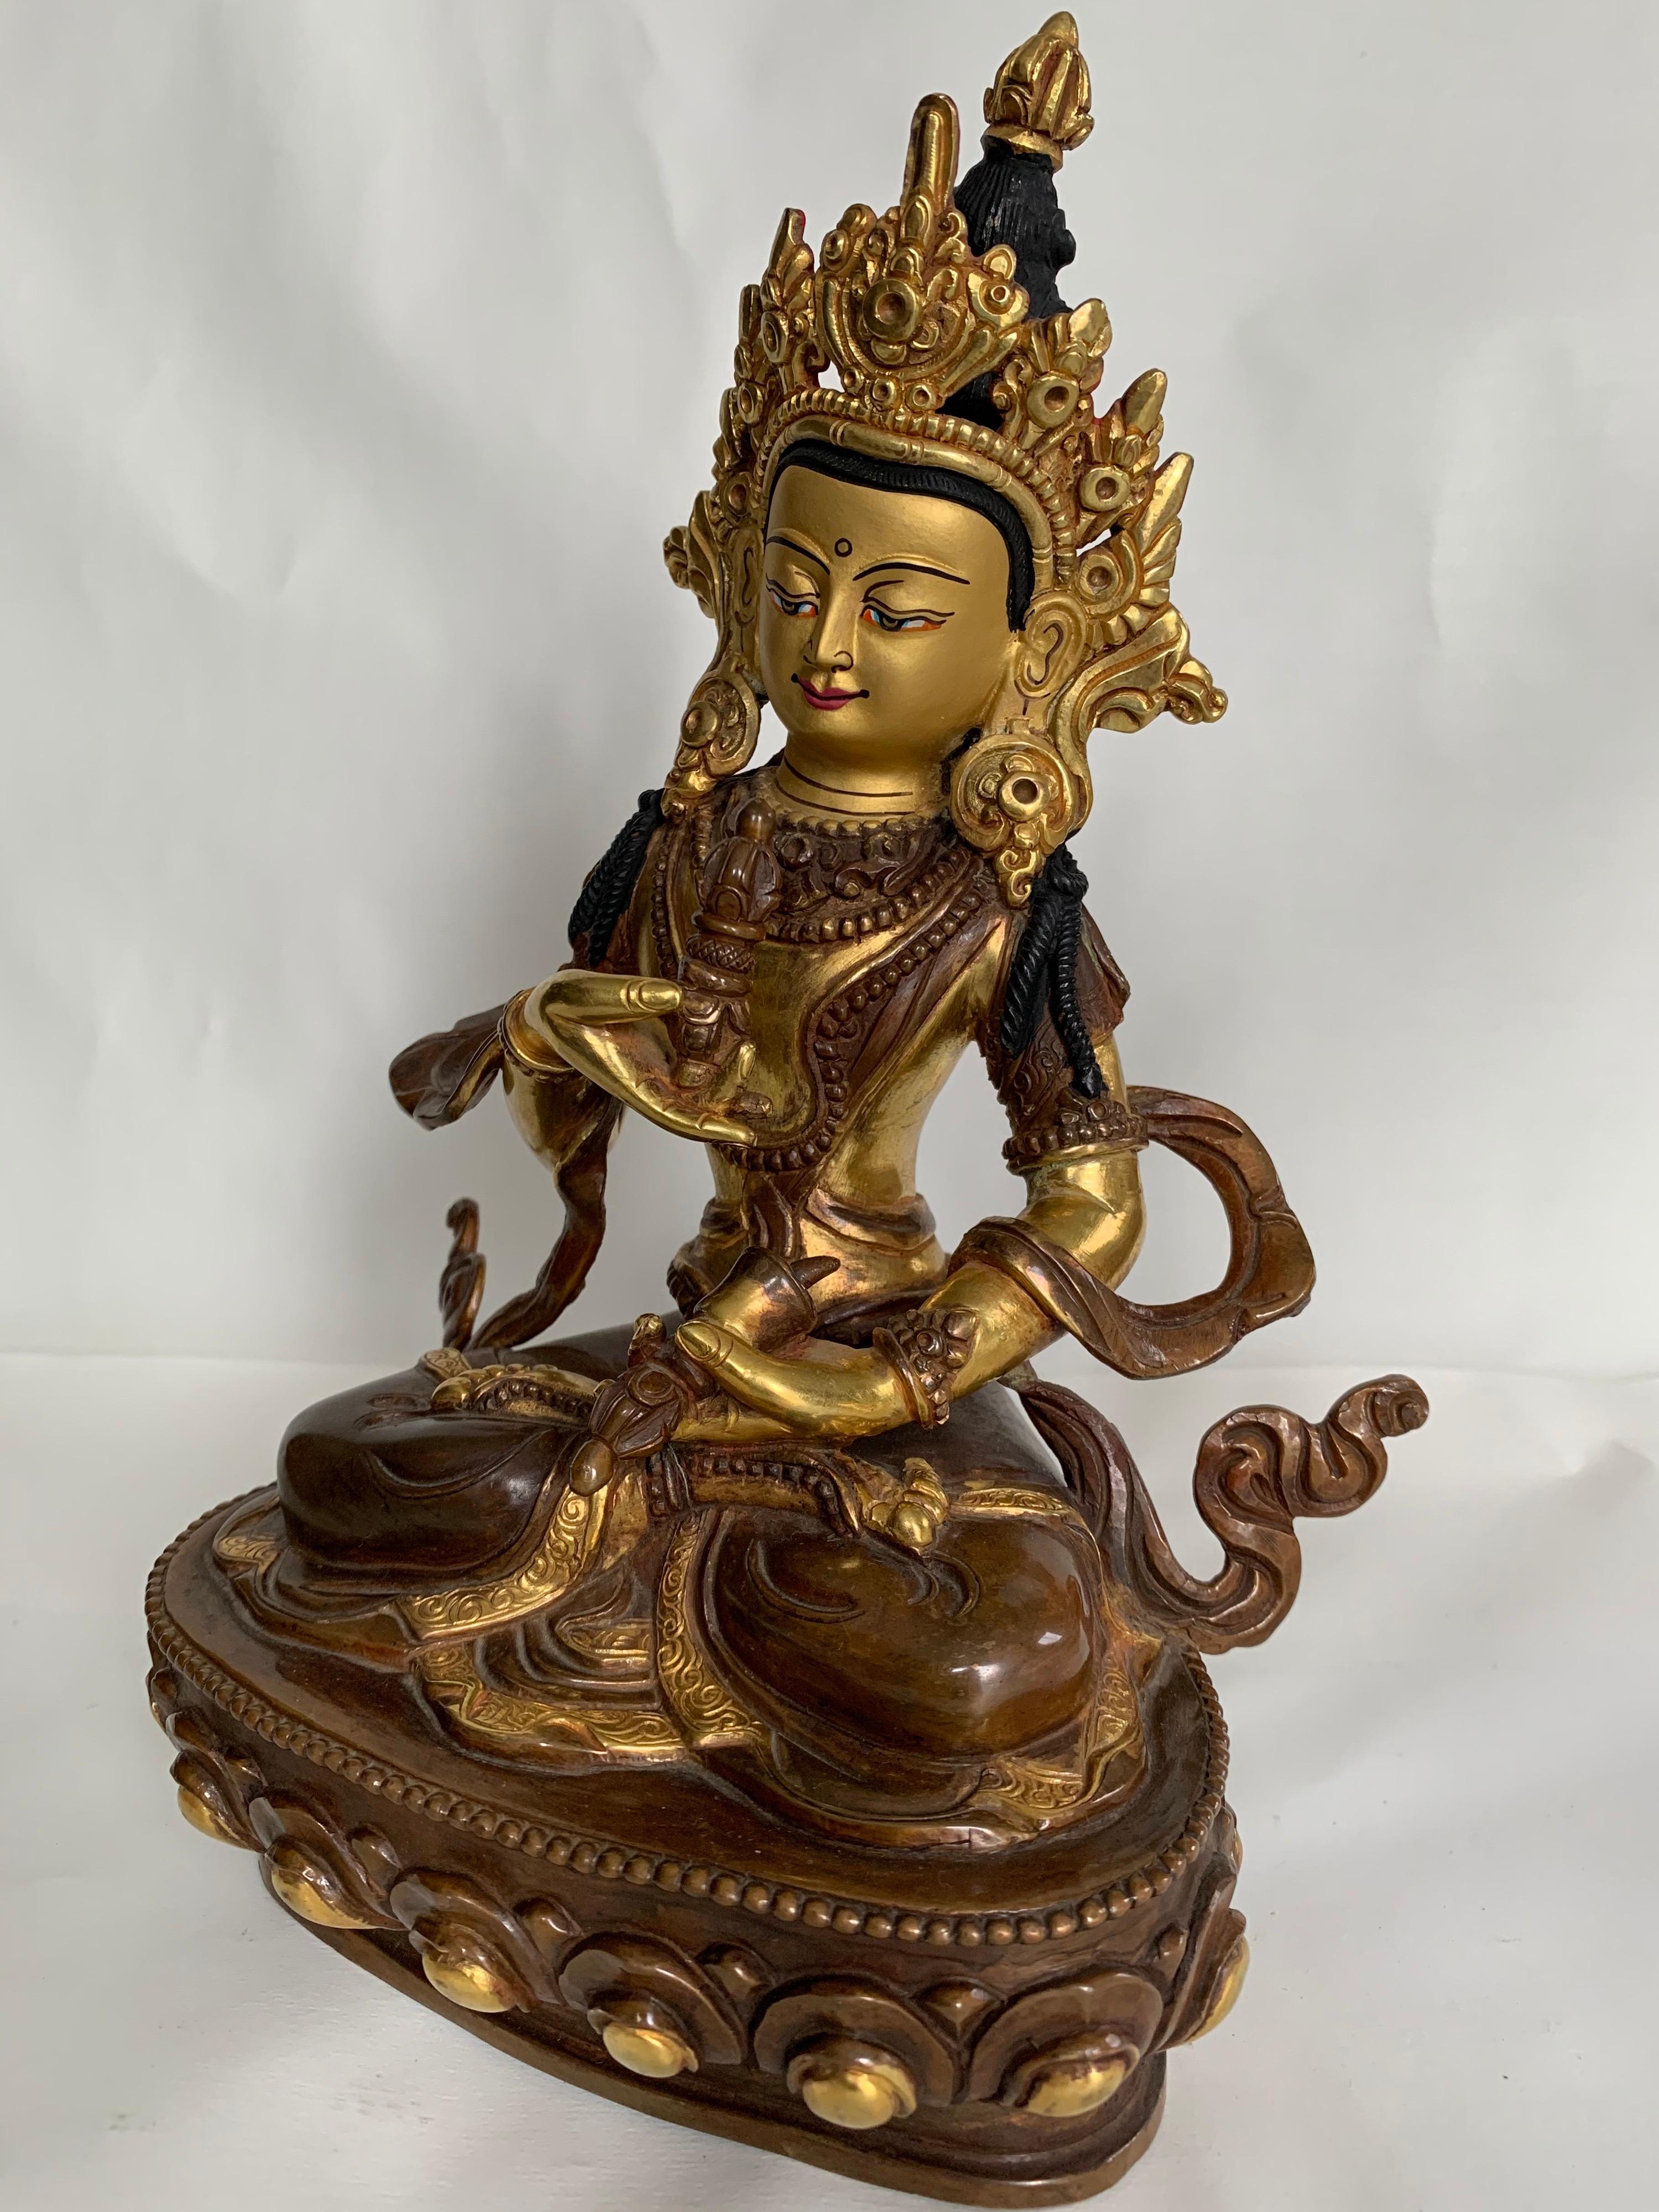 Vajrasattva Statue 9 Inch with 24K Gold Handcrafted by Lost Wax Process - Sculpture by Unknown